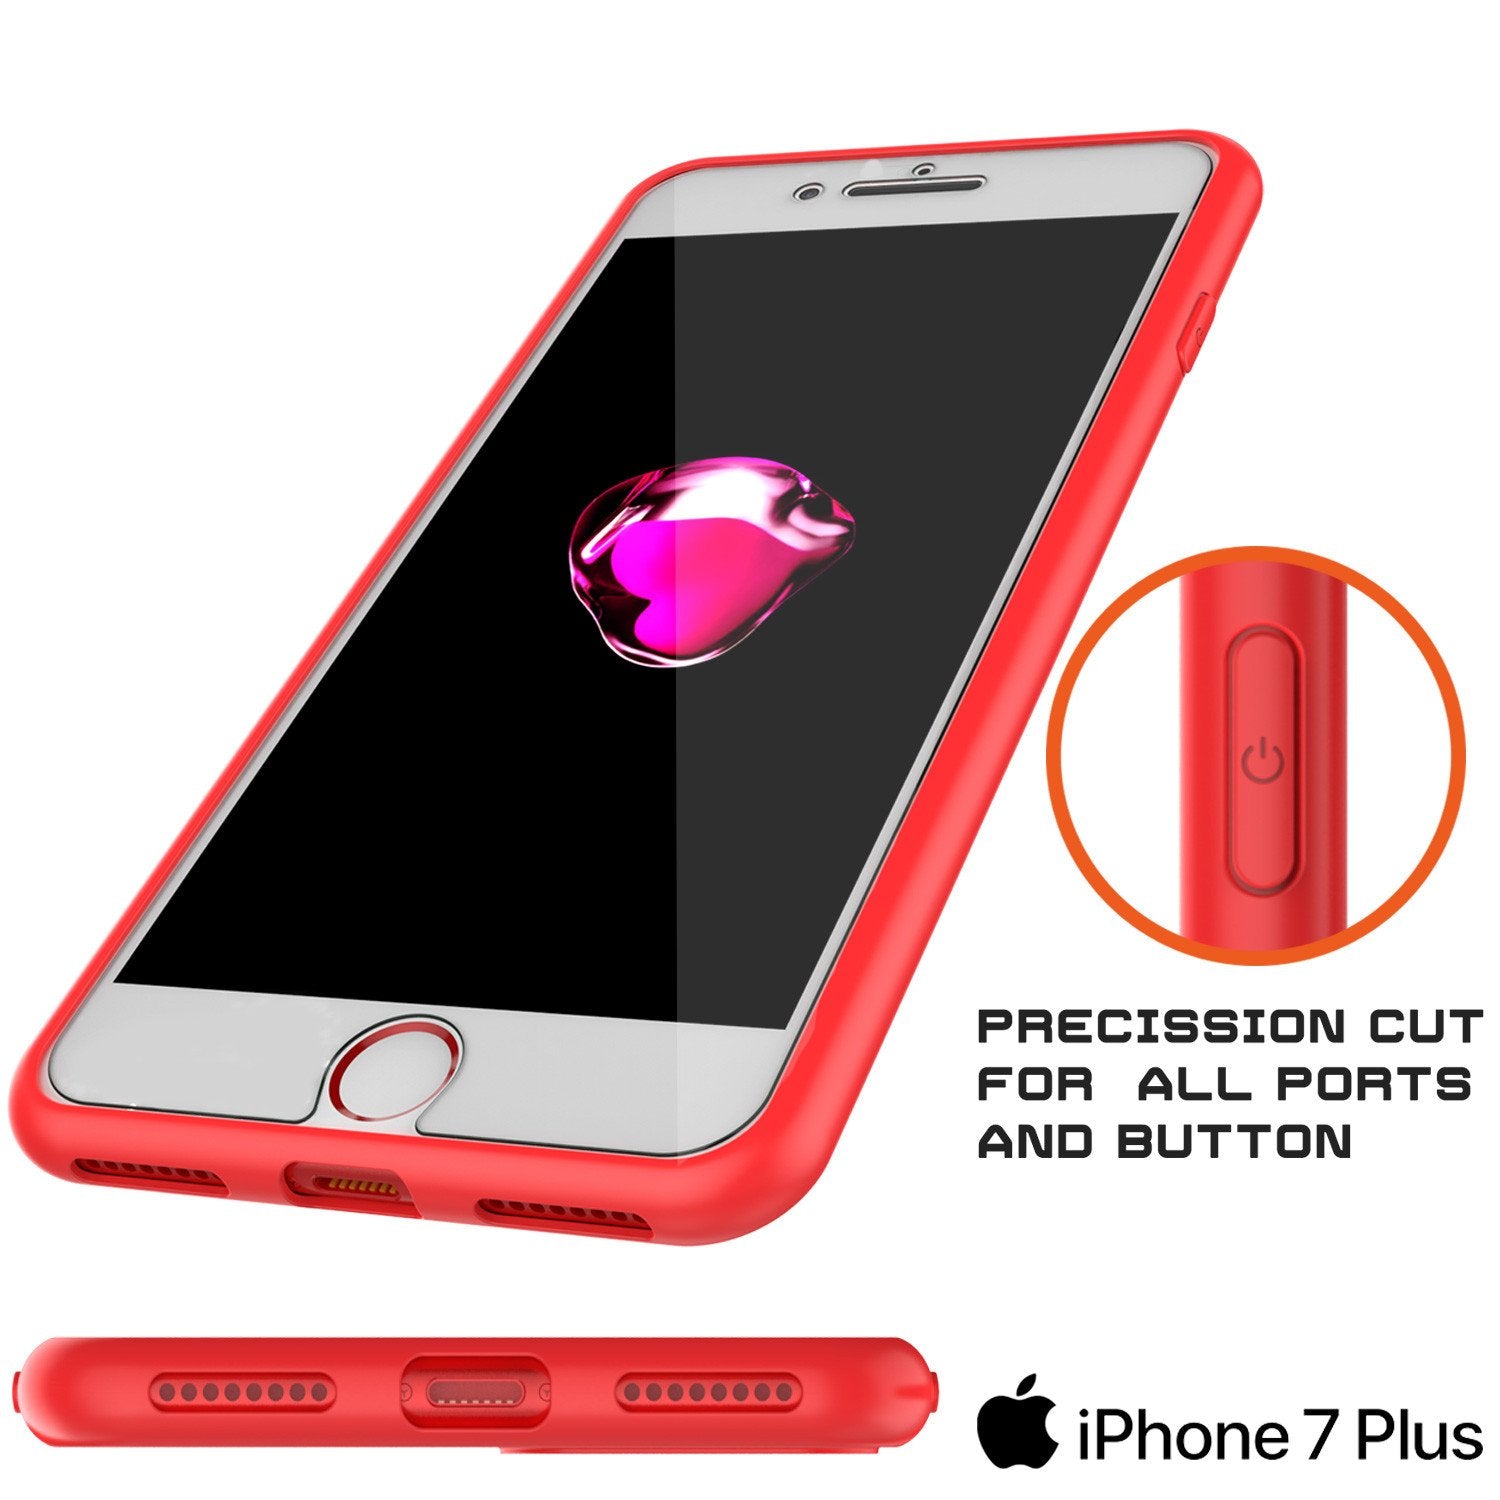 iPhone 7+ Plus Case [MASK Series] [RED] Full Body Hybrid Dual Layer TPU Cover W/ protective Tempered Glass Screen Protector